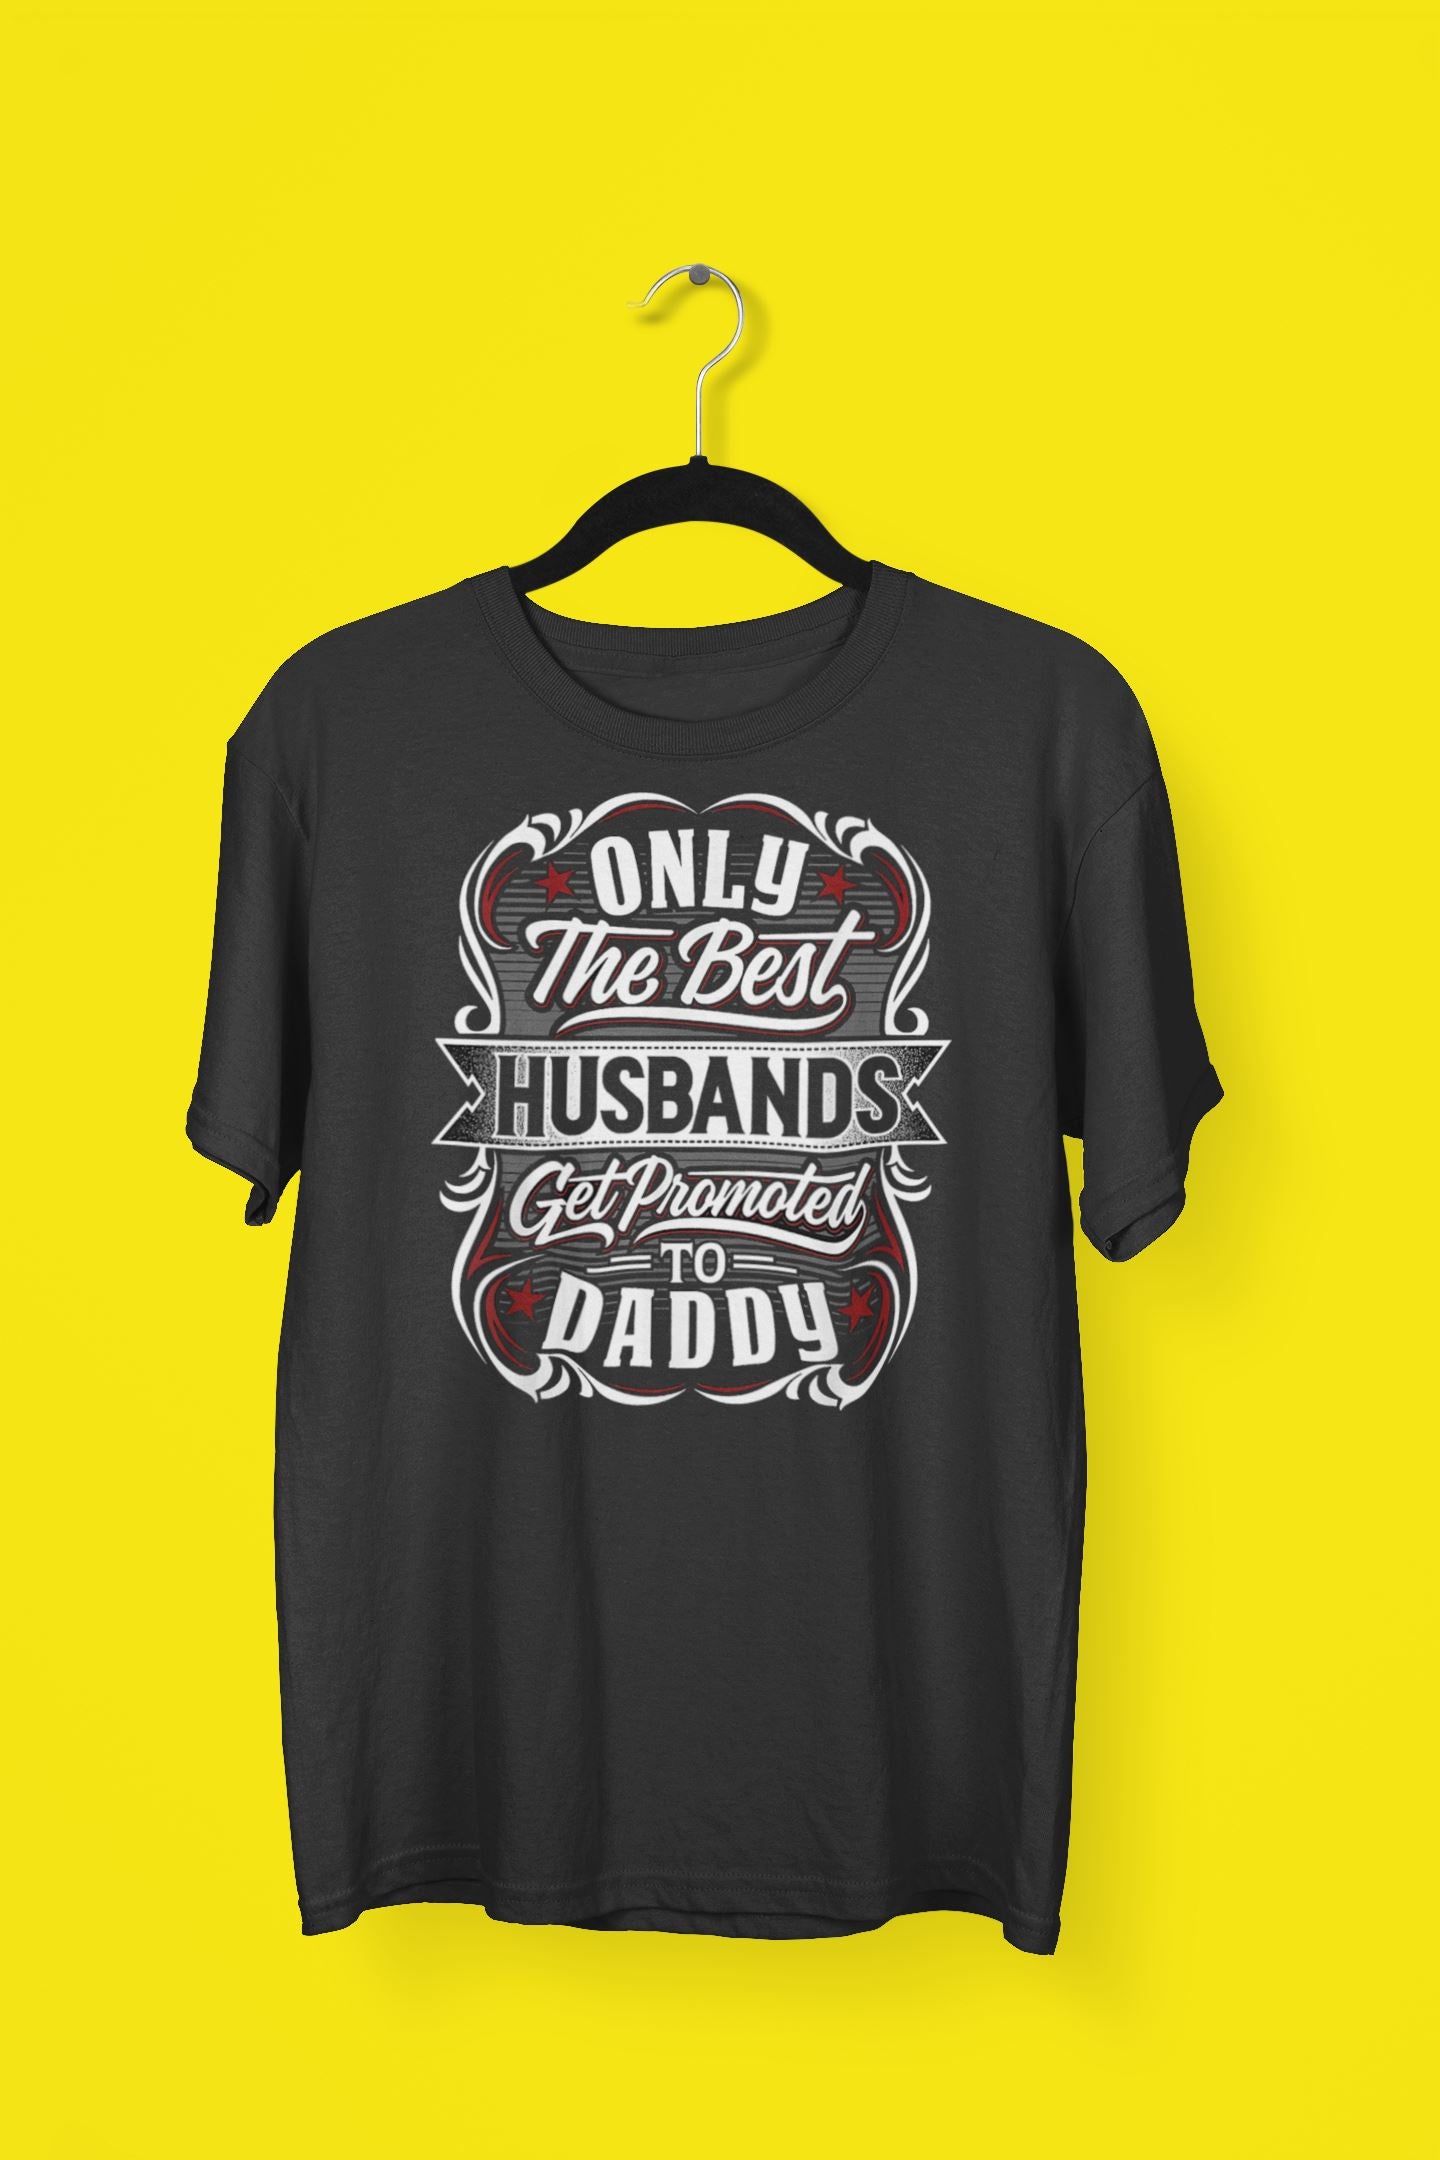 Only The Best Husbands Get Promoted to Daddy Exclusive Black T Shirt for Men freeshipping - Catch My Drift India